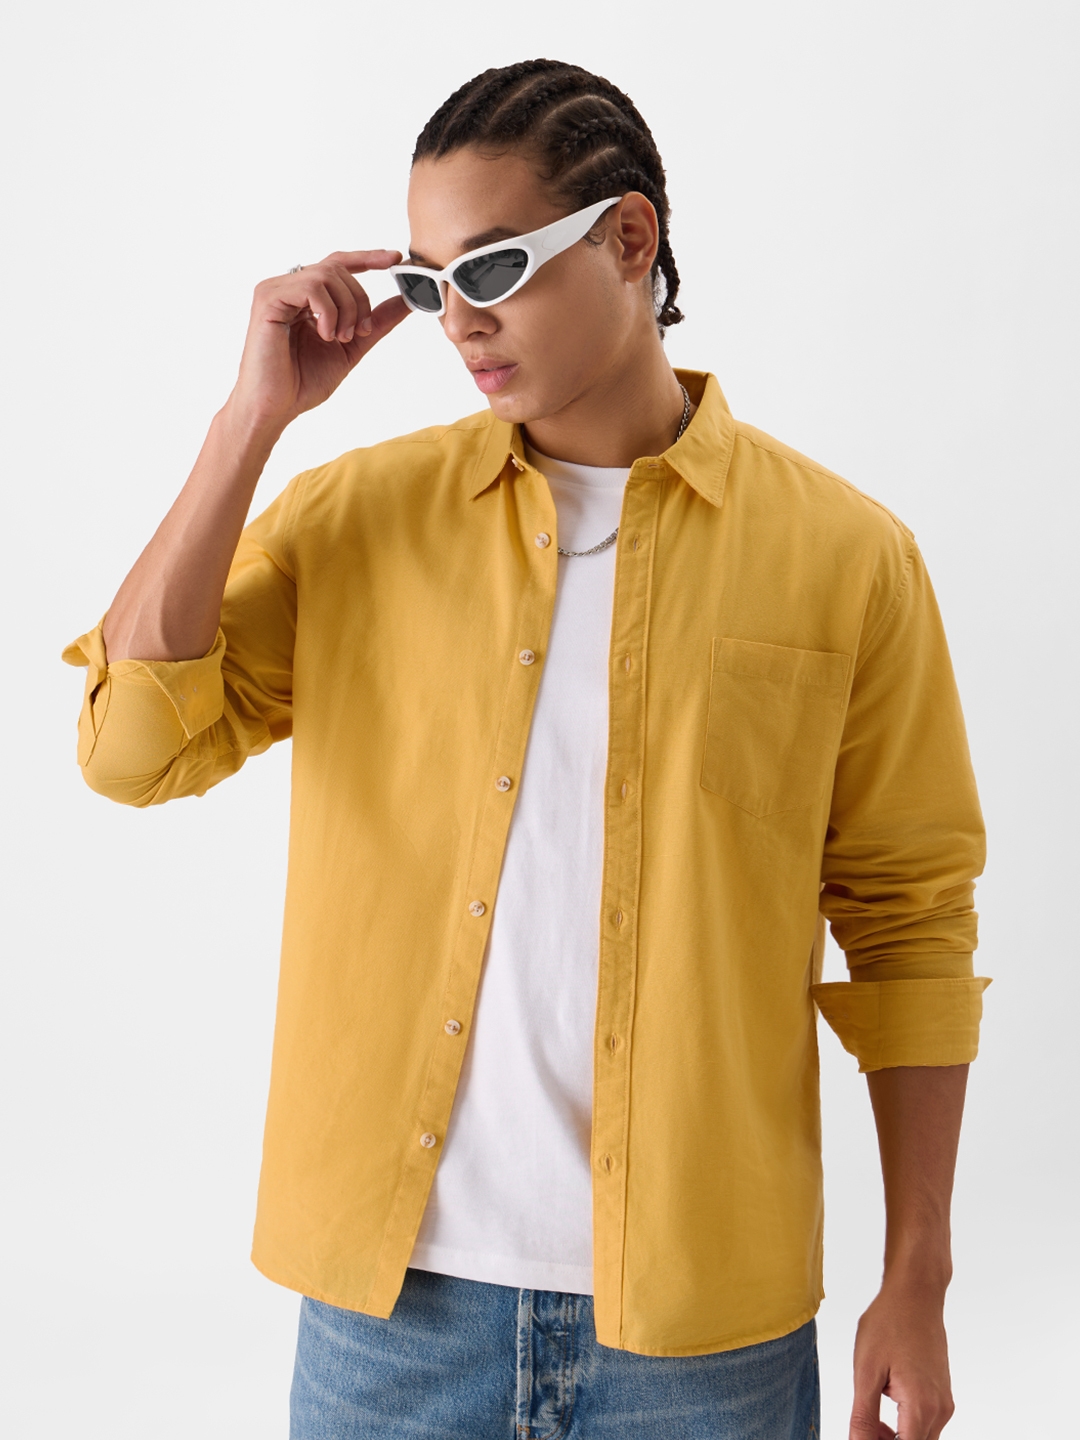 The Souled Store | Men's Solids: Chrome Yellow Shirts